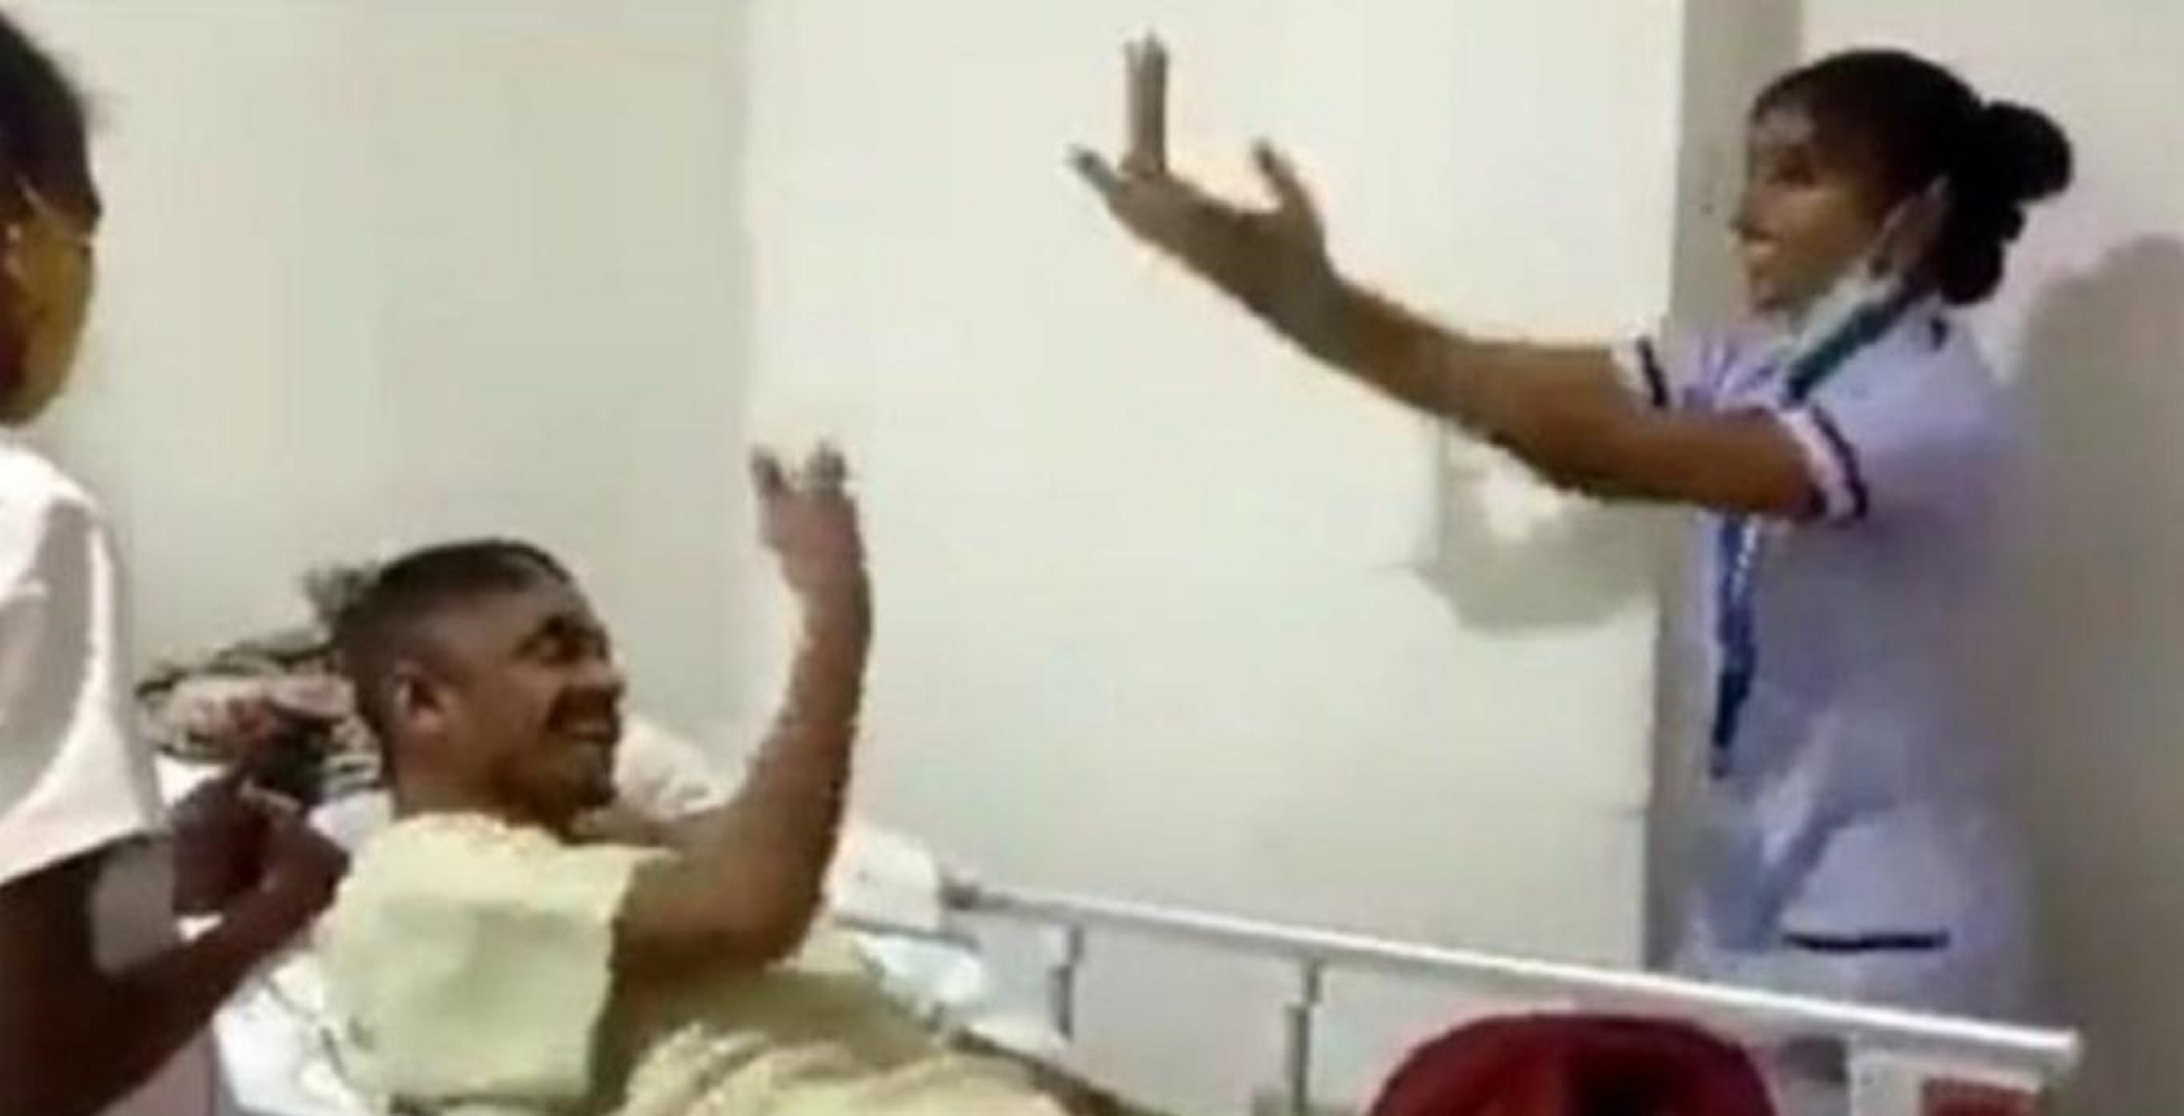 Inspiring: Nurse Dances To Cheer Paralyzed Patient During Physiotherapy [Viral Video]